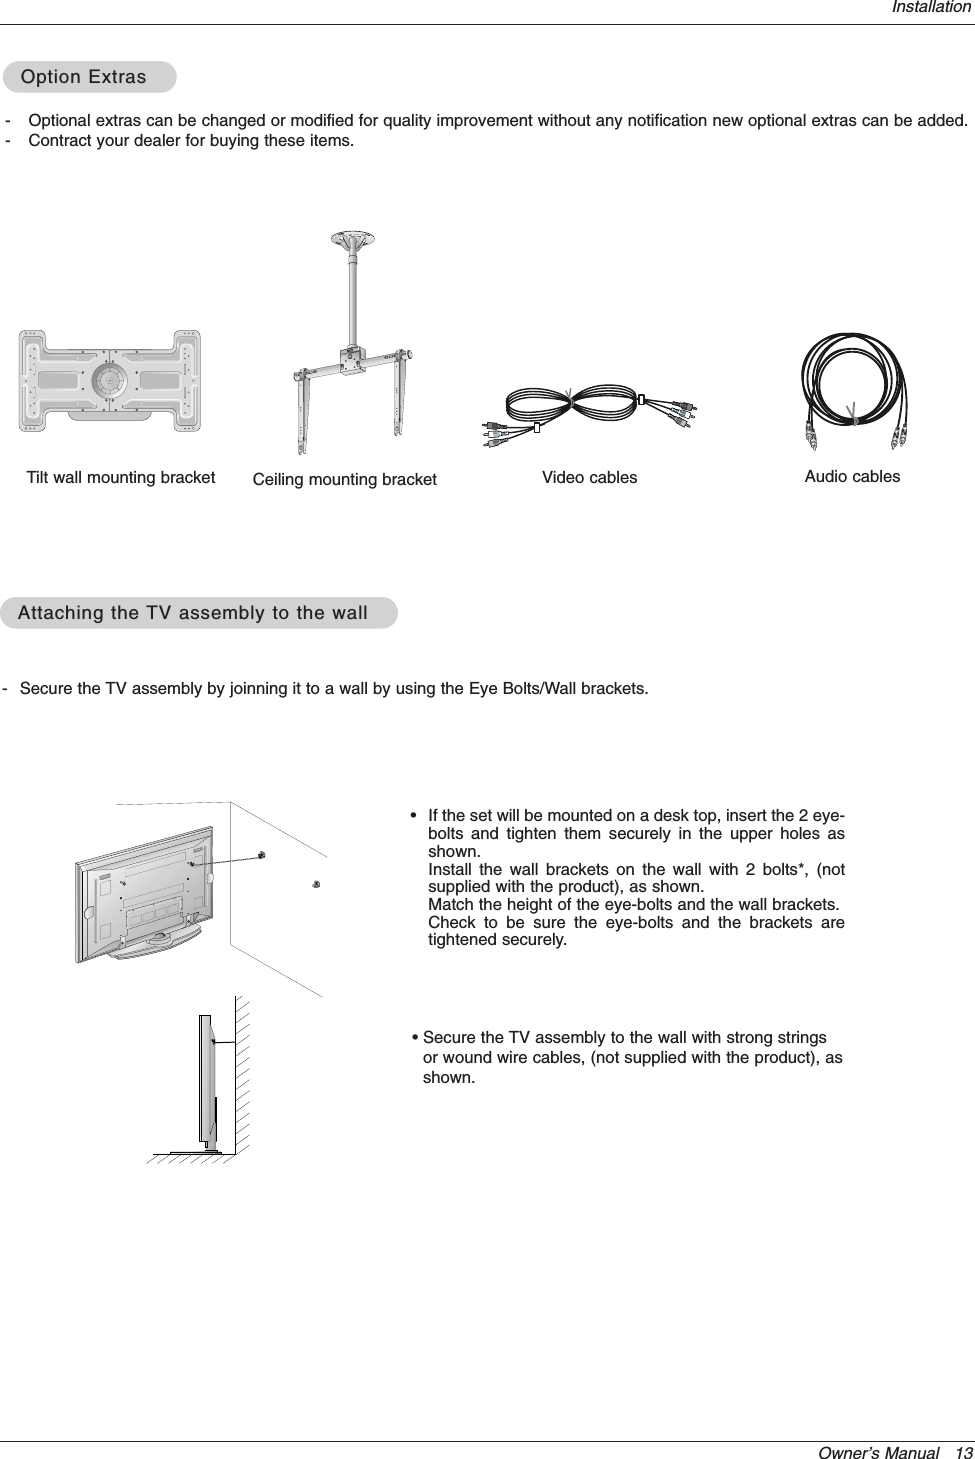 Owner’s Manual   13Installation- Secure the TV assembly by joinning it to a wall by using the Eye Bolts/Wall brackets.Attaching the Attaching the TV assembly to the wallTV assembly to the wall•If the set will be mounted on a desk top, insert the 2 eye-bolts and tighten them securely in the upper holes asshown.Install the wall brackets on the wall with 2 bolts*, (notsupplied with the product), as shown.Match the height of the eye-bolts and the wall brackets.Check to be sure the eye-bolts and the brackets aretightened securely.• Secure the TV assembly to the wall with strong stringsor wound wire cables, (not supplied with the product), asshown.4042504240Ceiling mounting bracket- Optional extras can be changed or modified for quality improvement without any notification new optional extras can be added.- Contract your dealer for buying these items.Option ExtrasOption ExtrasTilt wall mounting bracket Video cables Audio cables